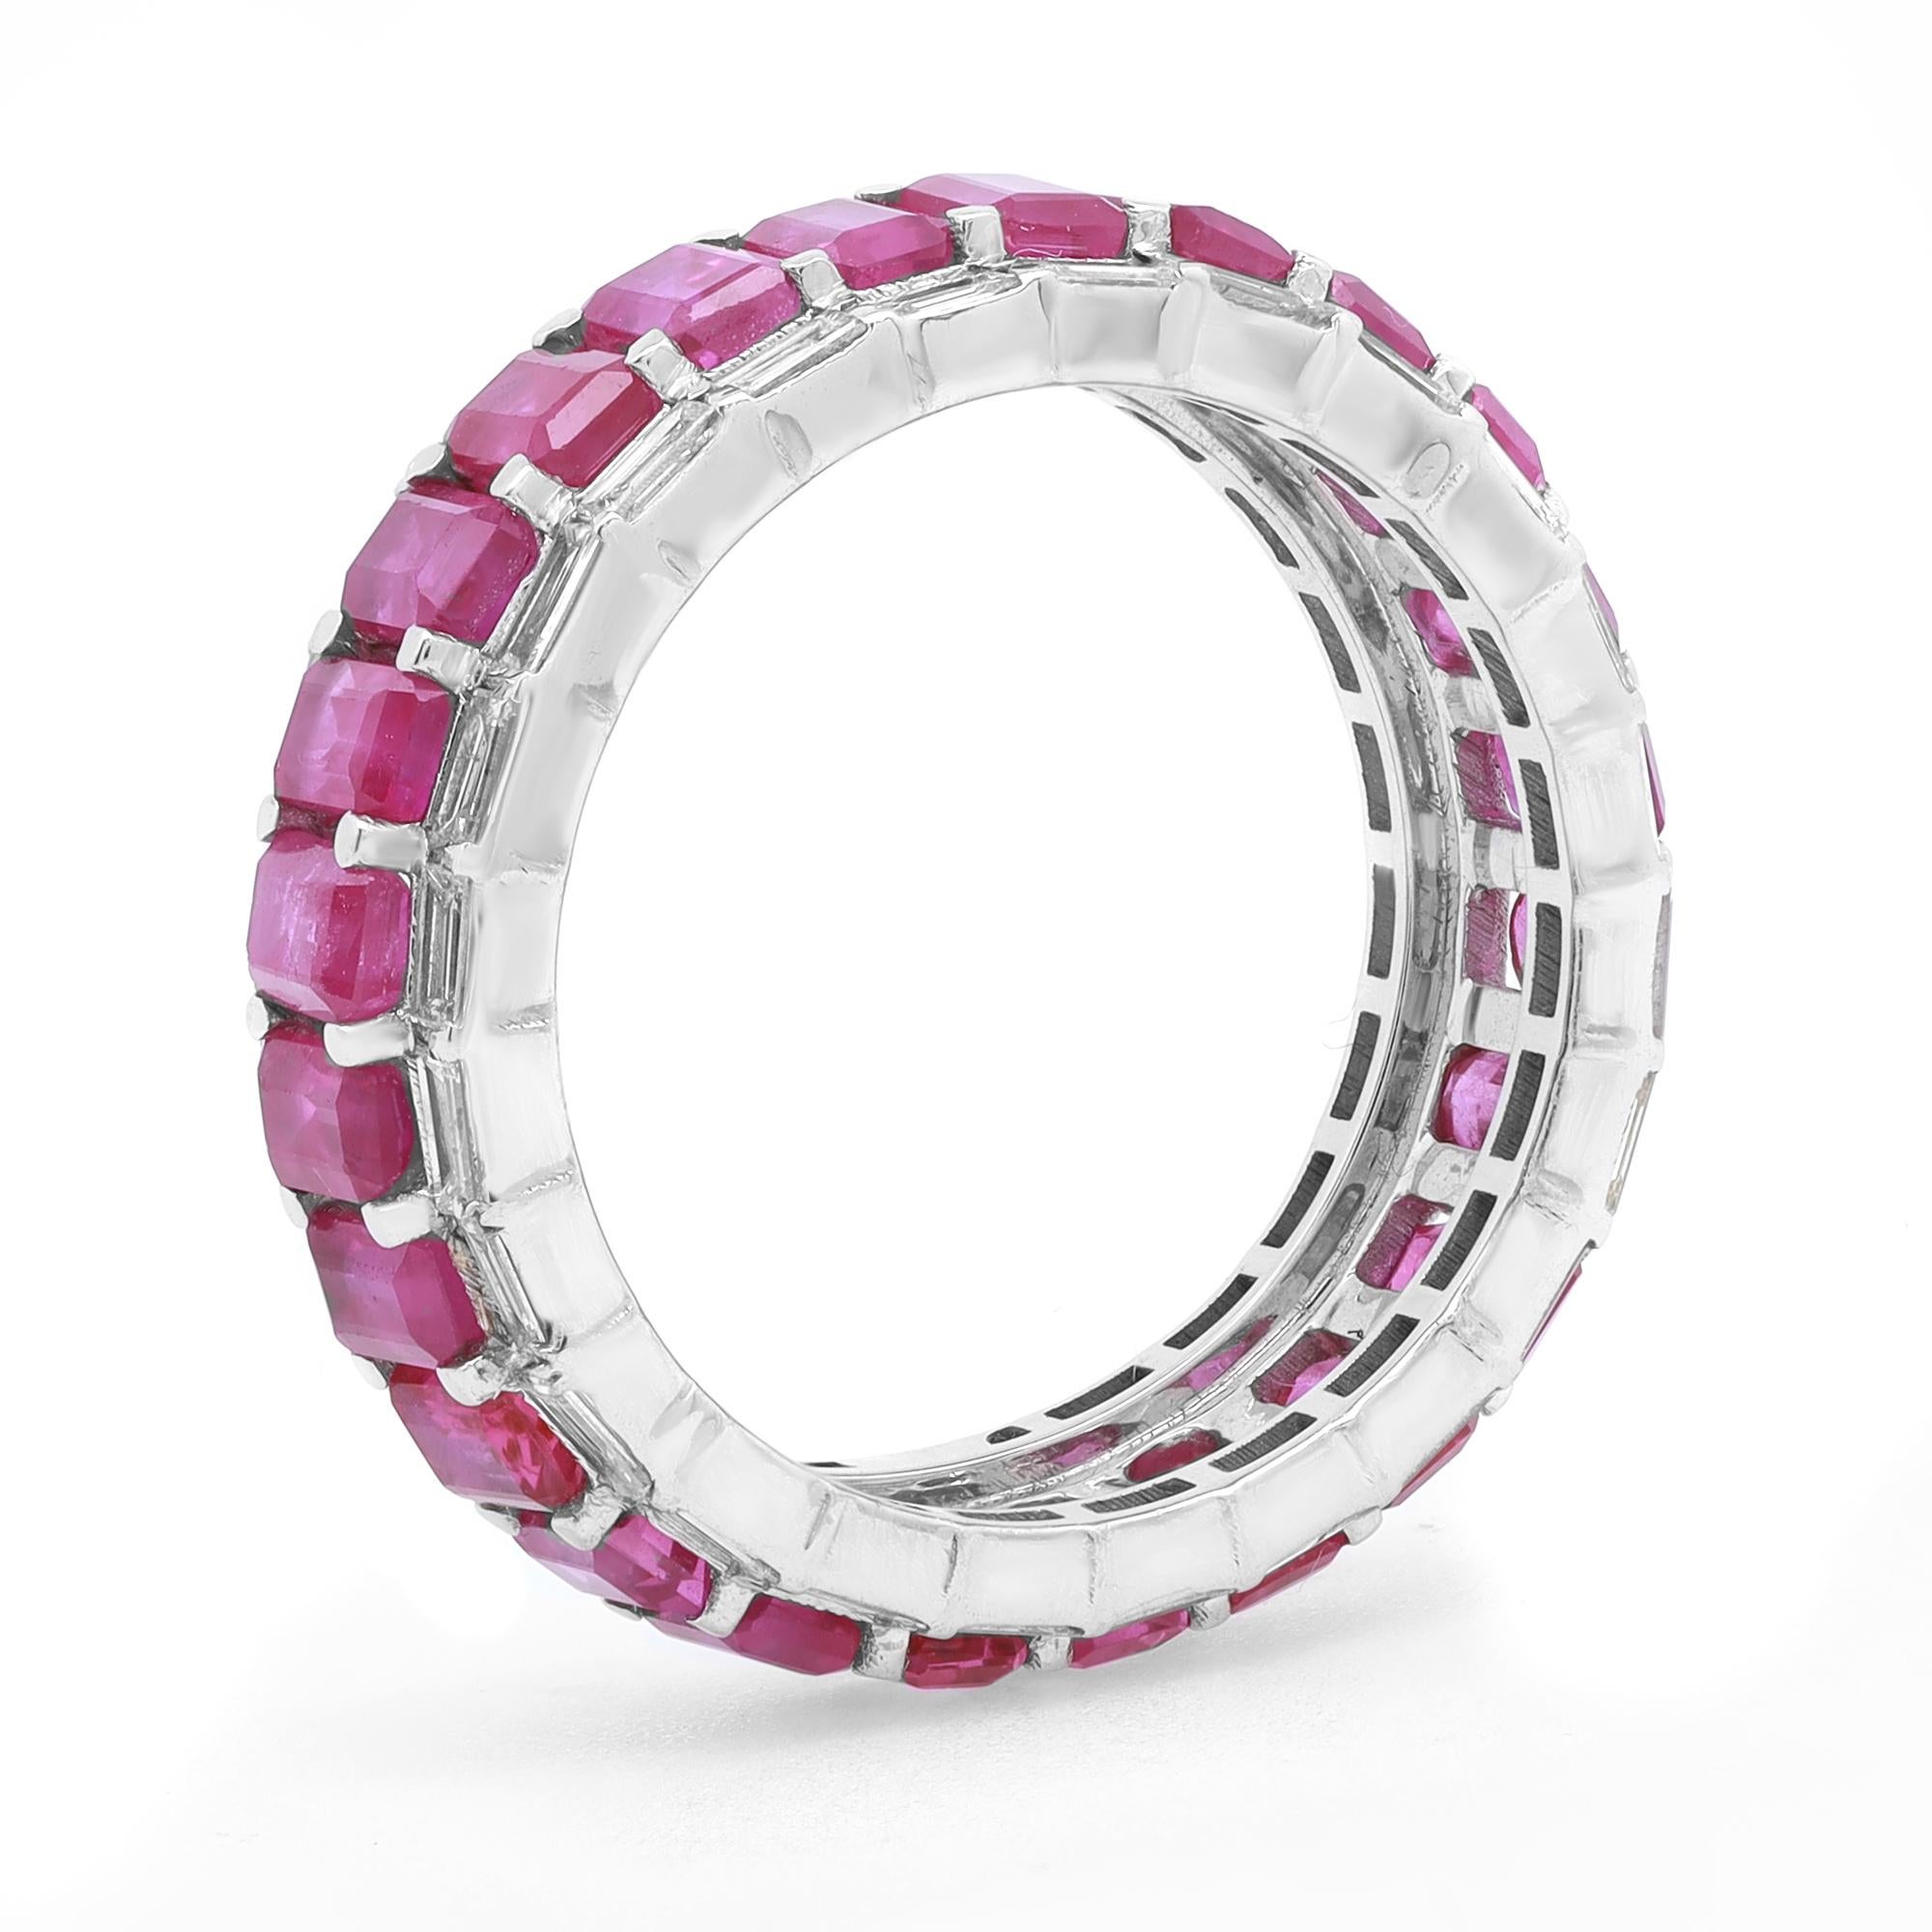 This stunning eternity band features prong set Emerald Cut Rubies as a center row with Baguette cut diamonds outline. The stones are beautifully circling all the way around the band and are set in fine 14k white gold. Ruby total carat weight: 4.89.